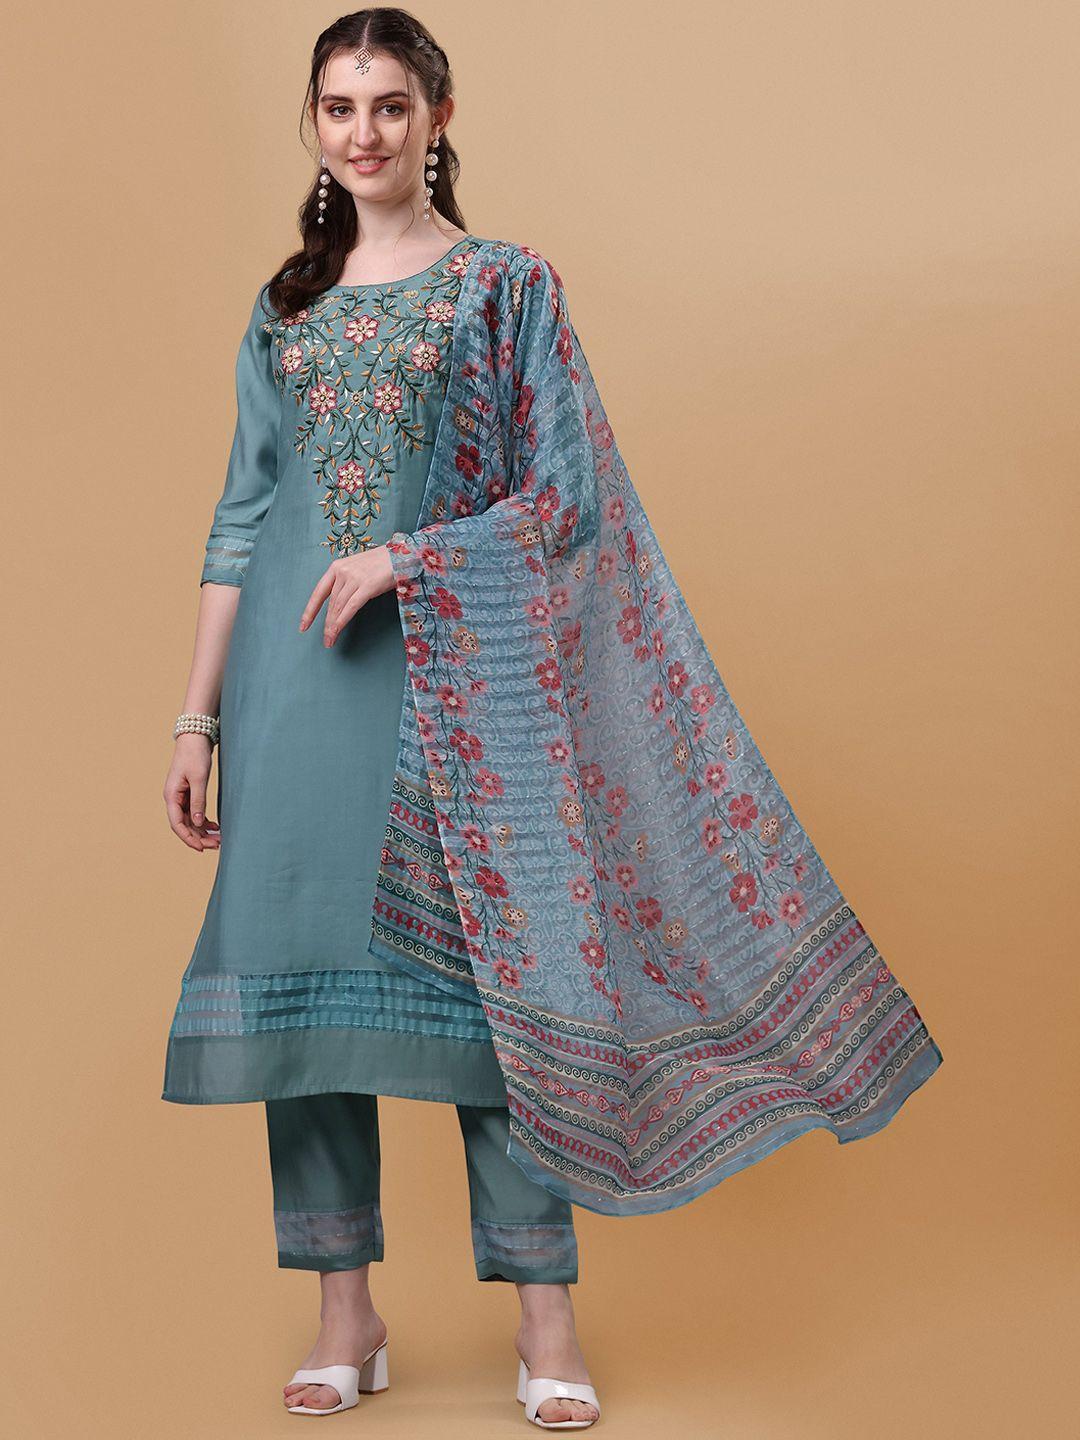 berrylicious-blue-floral-embroidered-thread-work-chanderi-cotton-kurta-with-trousers-&-dupatta